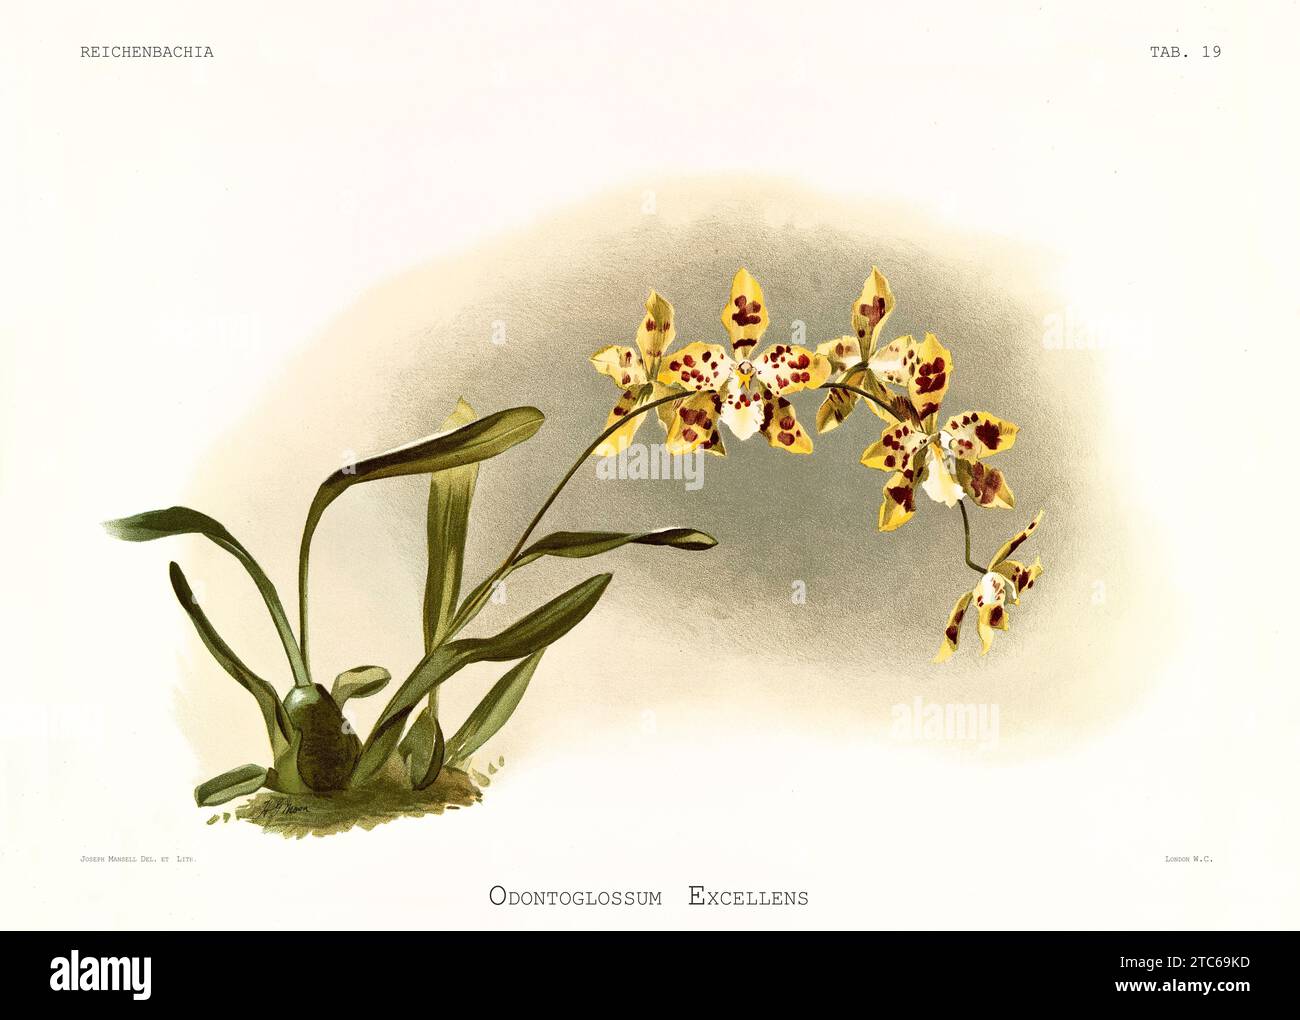 Old illustration of  Oncidium x excellens. Reichenbachia, by F. Sander. St. Albans, UK, 1888 - 1894 Stock Photo